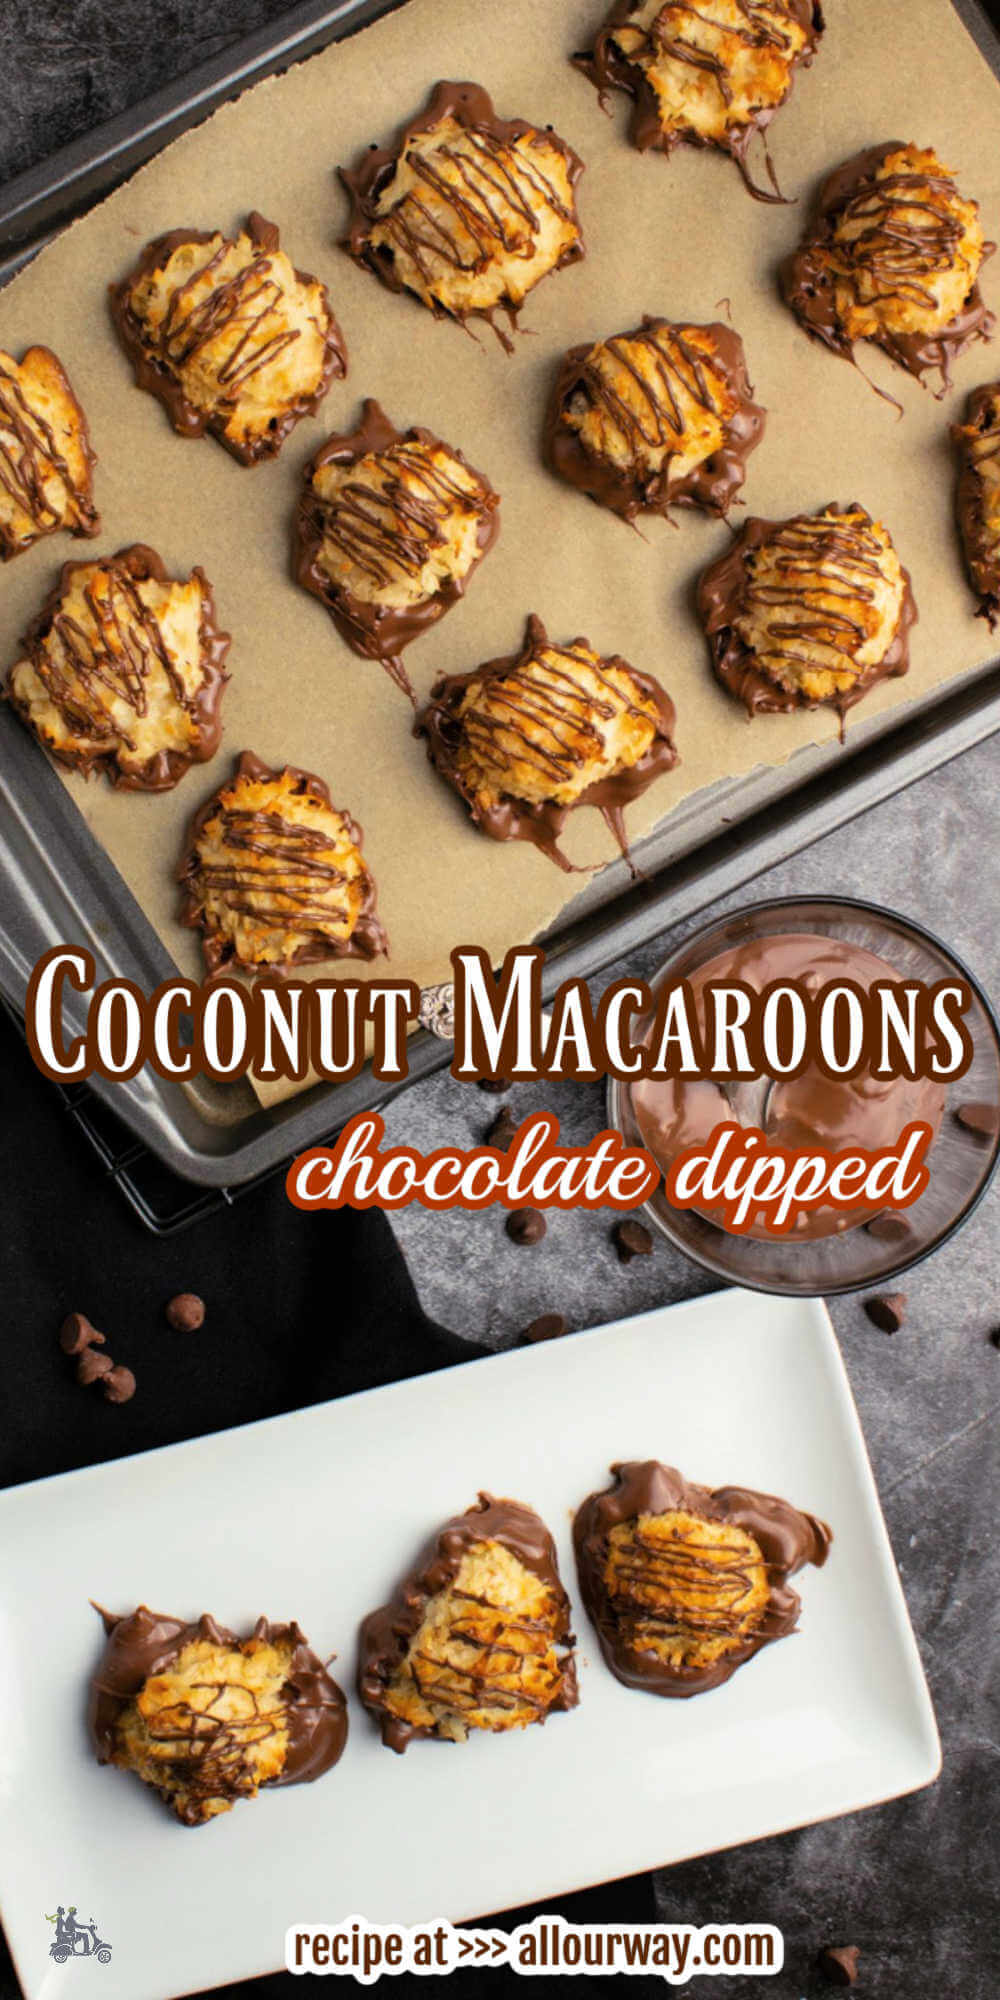 These Chocolate Dipped Coconut Macaroons are crispy on the outside and chewy in the center with just the right amount of sweetness. The coconut and chocolate flavors pair so well together making these an irresistible treat. This quick and easy recipe makes perfect little cookie mounds every time.